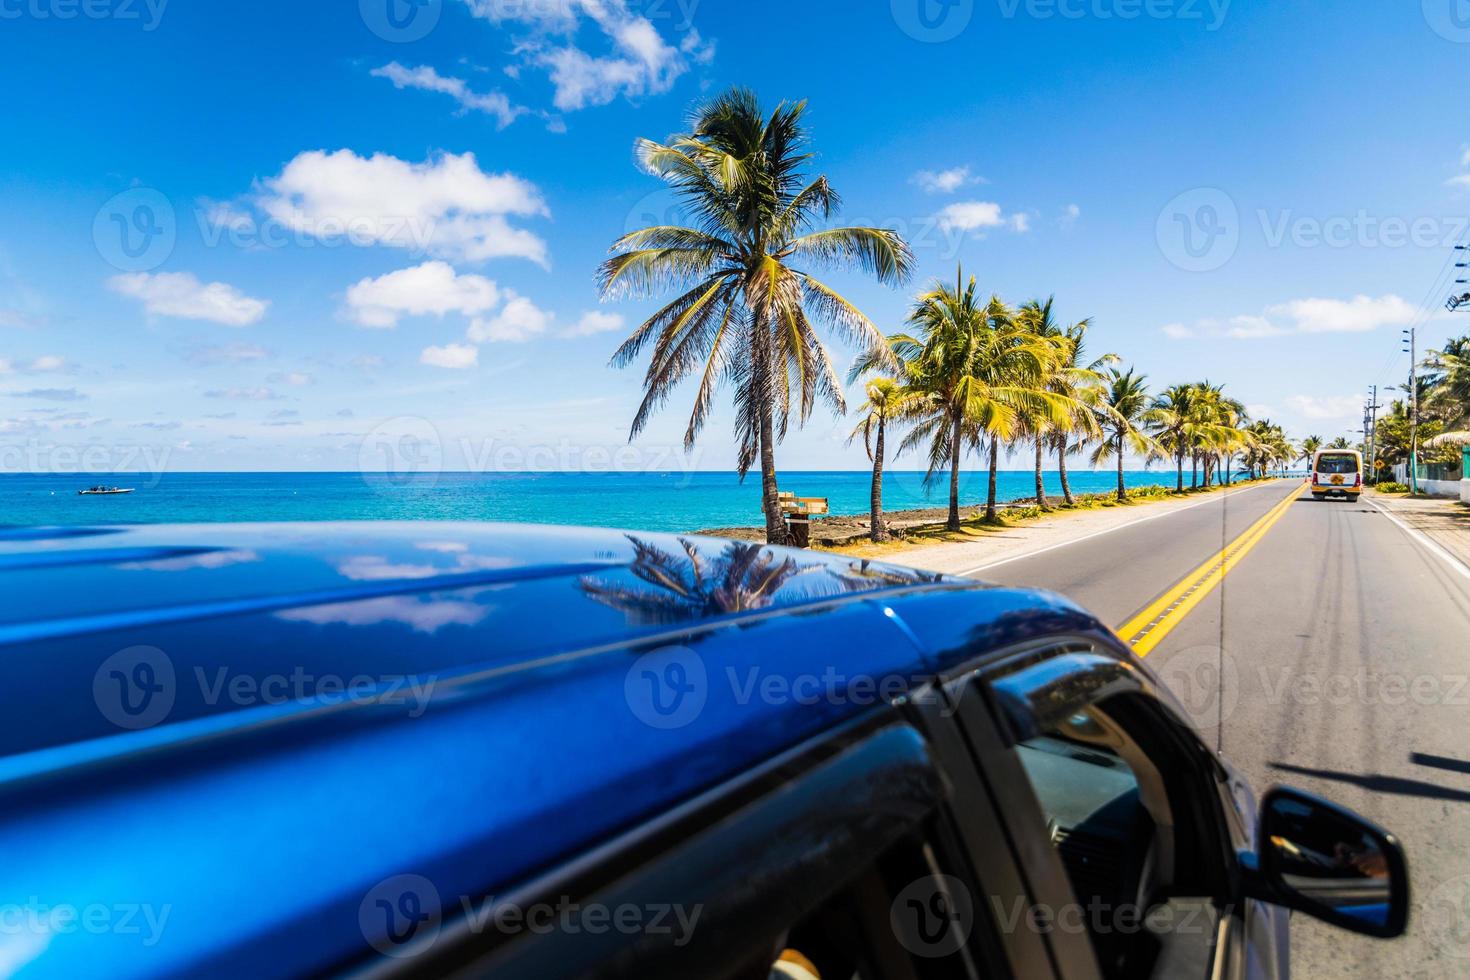 View from above a car in Caribbean San-Andres island. photo